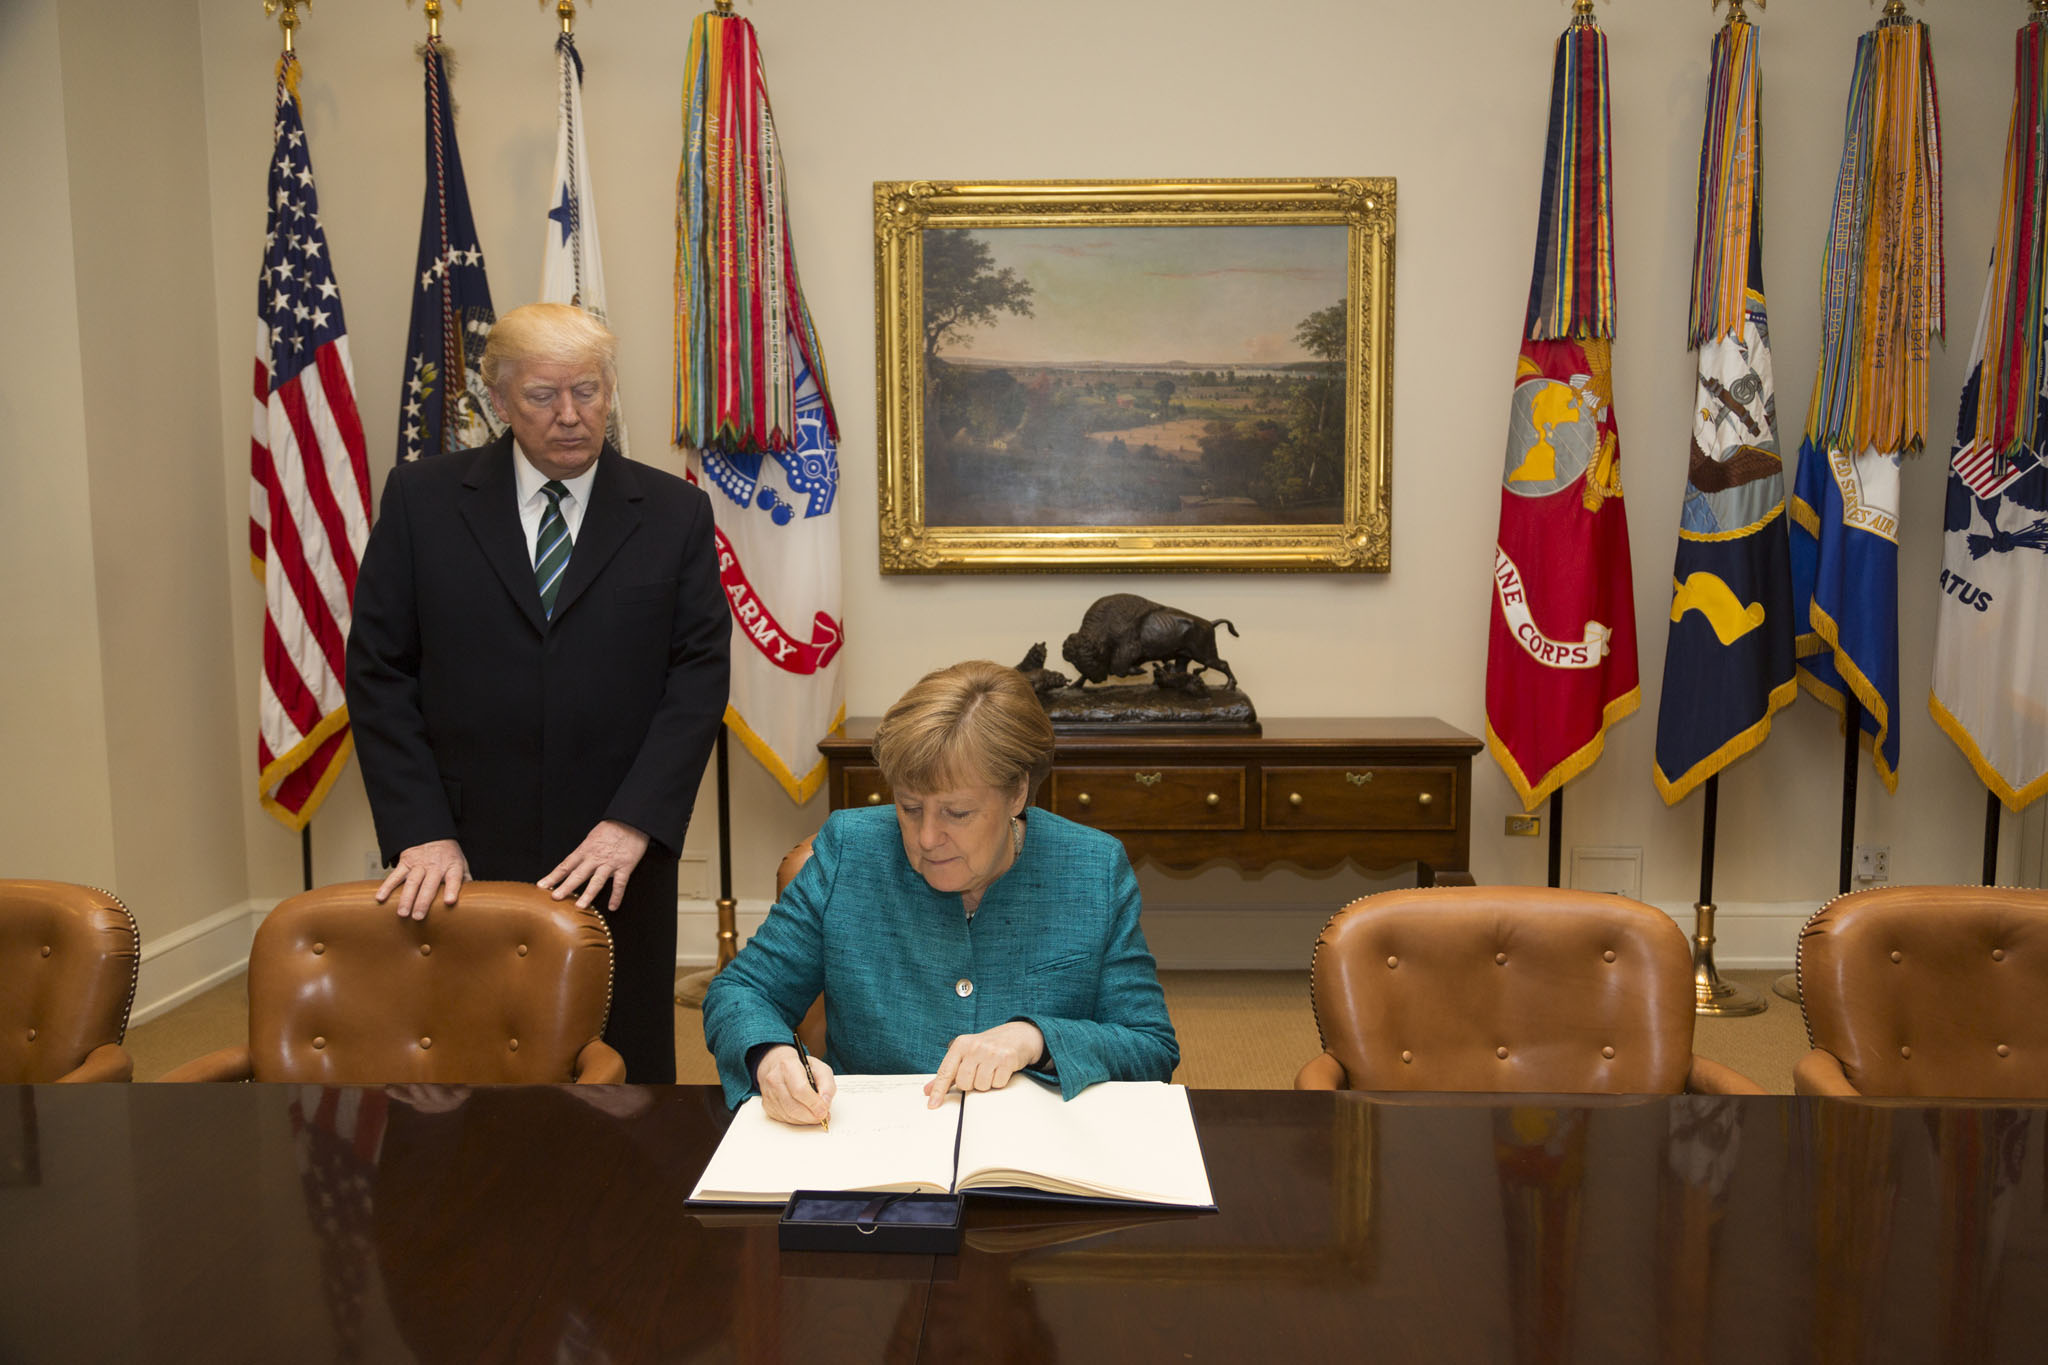 Angela Merkel signs the guest book in the Roosevelt Room, March 2017